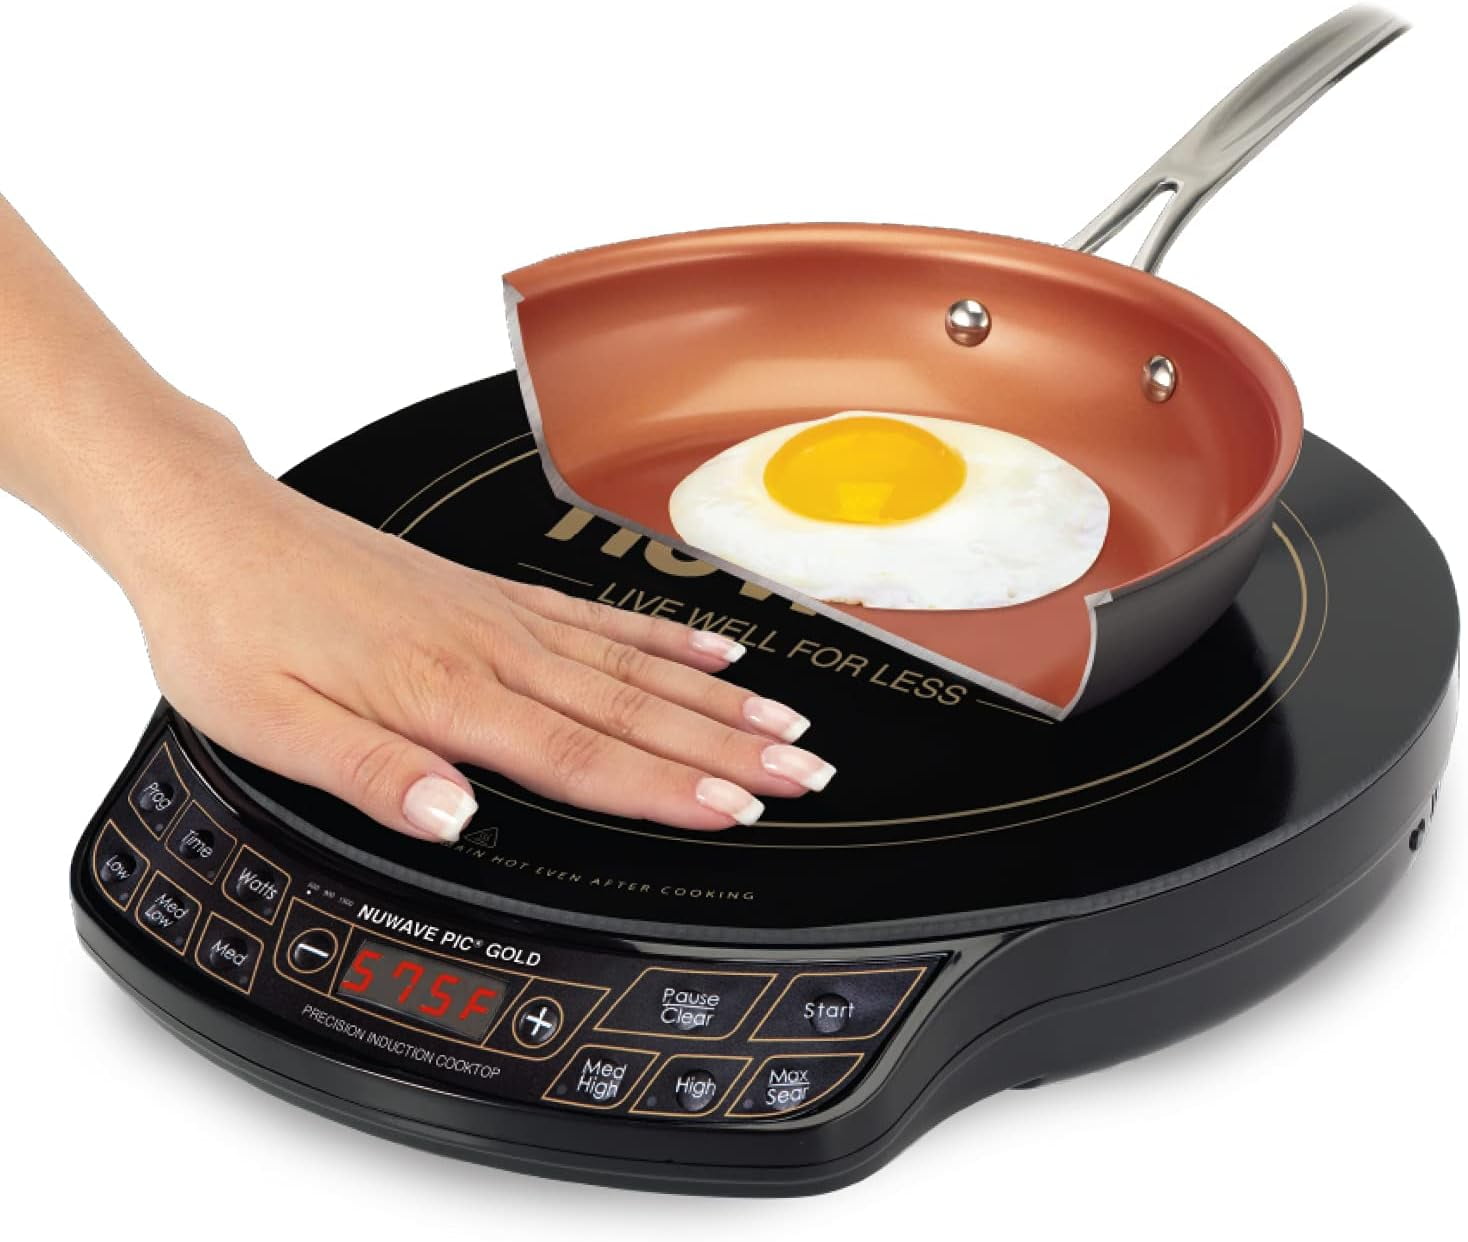 Hearthware NuWave Precision Induction Cooktop and Pans